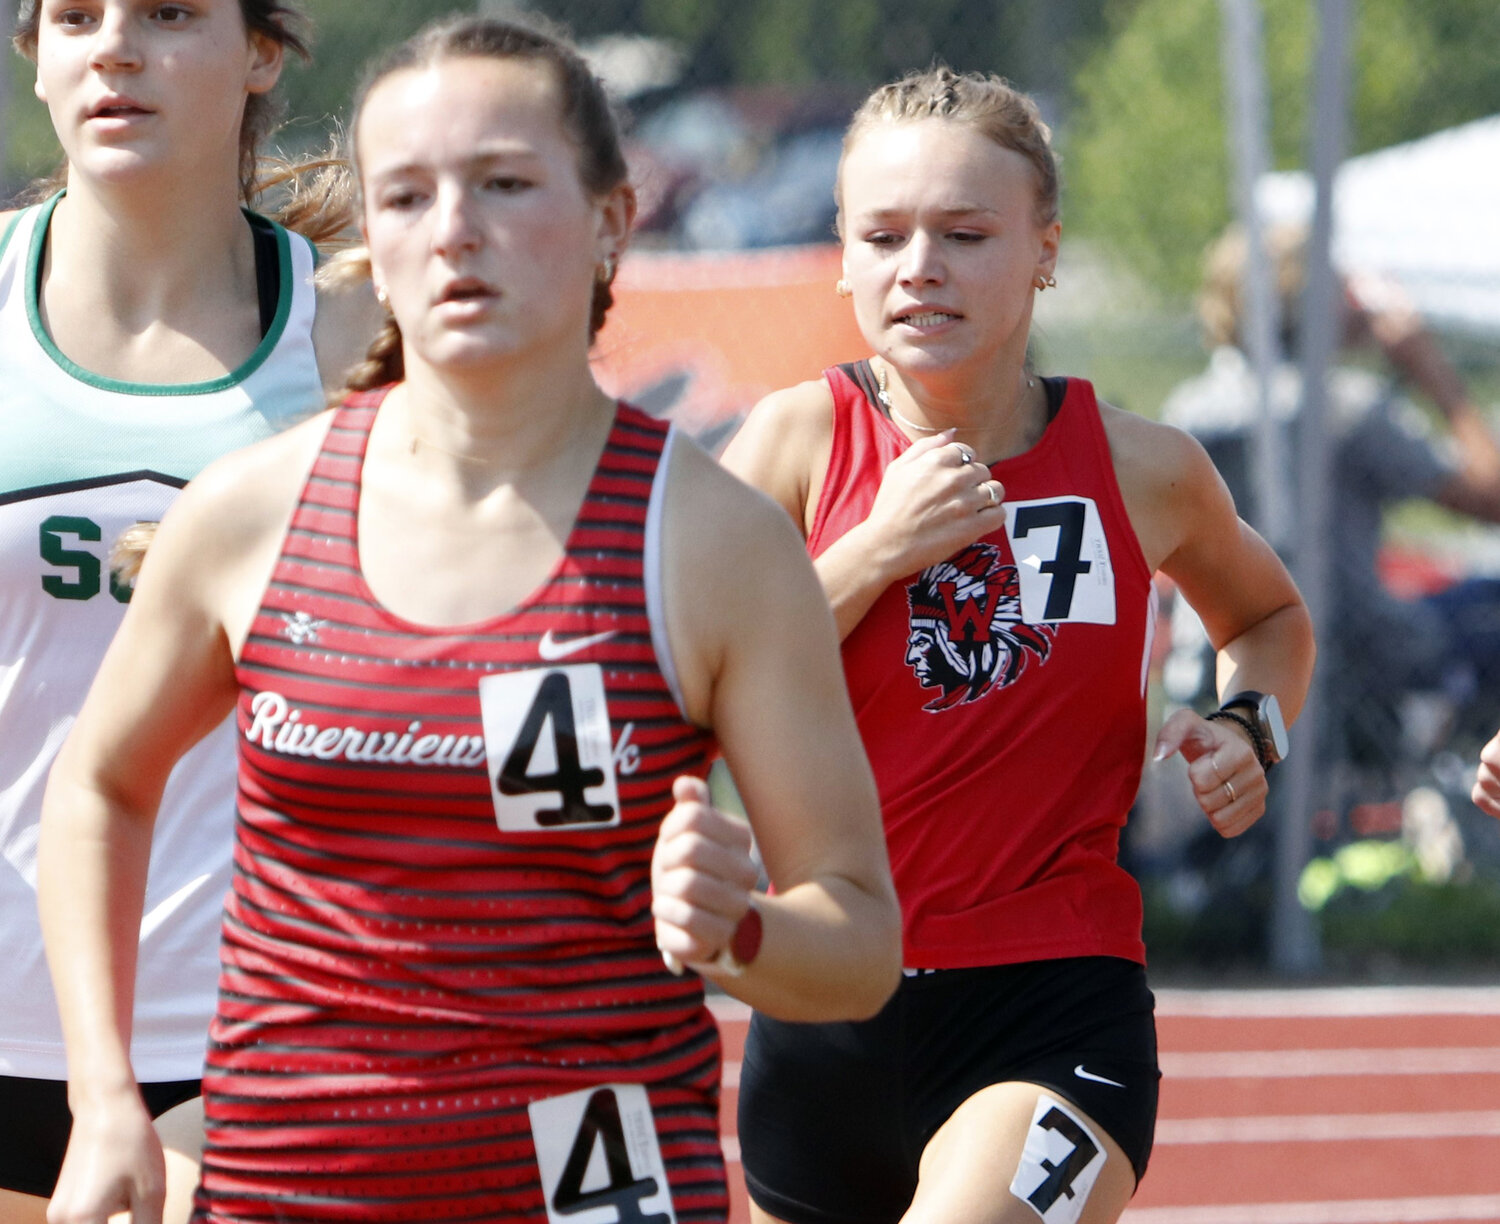 Madelyn Marschhel (right) looks to catch the leader of the pack during the 800-meter run.